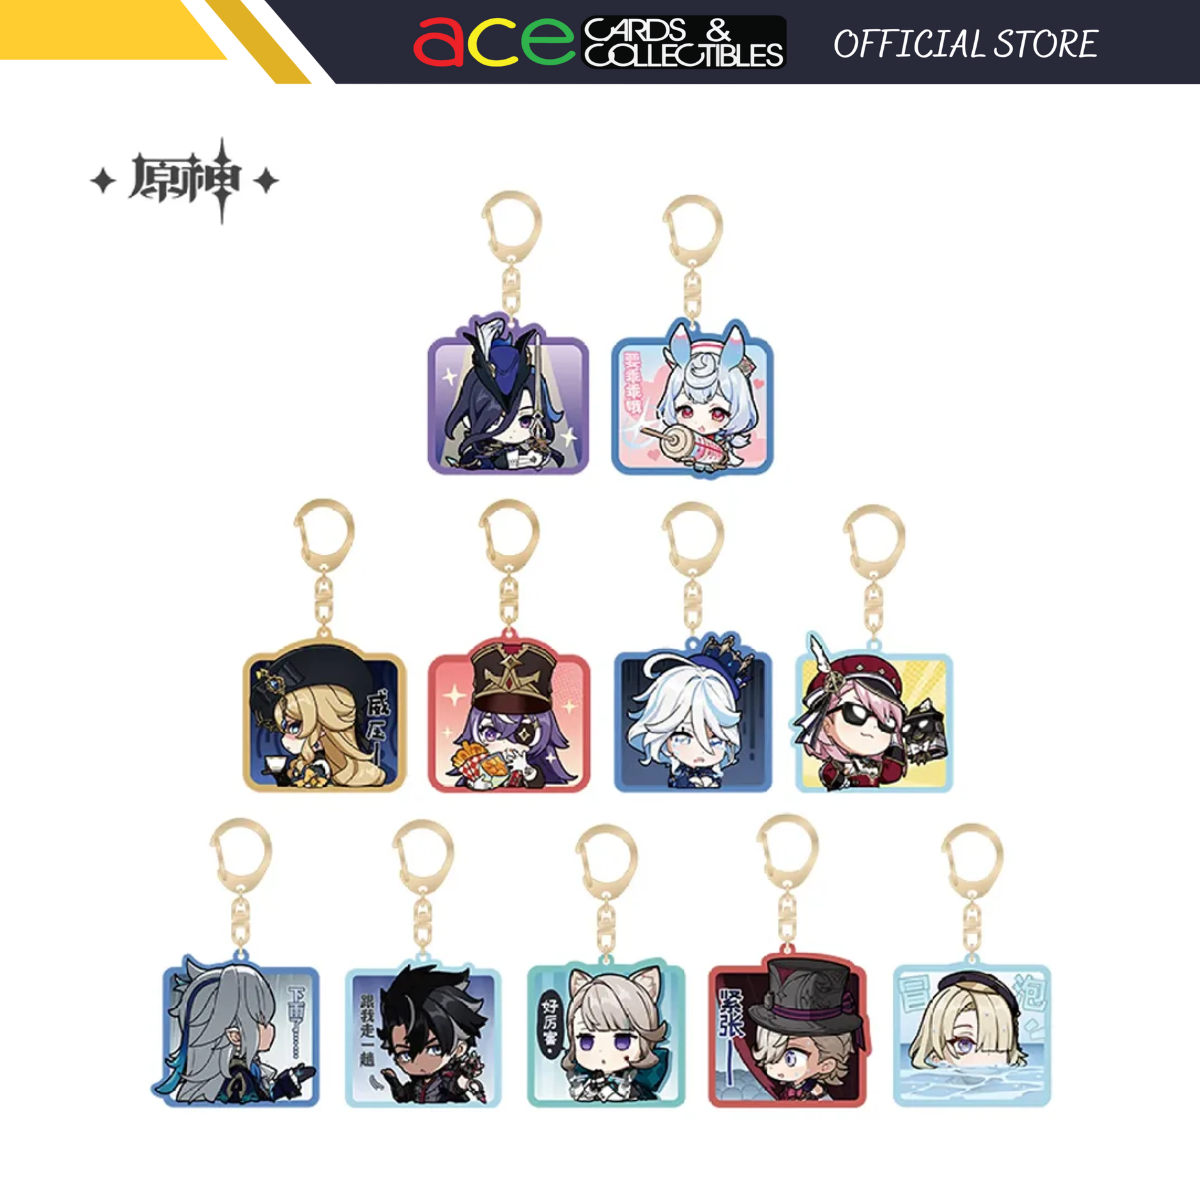 miHoYo Genshin Impact Chibi Fontaine Character Expression Sticker Keychain-Clorinde-miHoYo-Ace Cards &amp; Collectibles